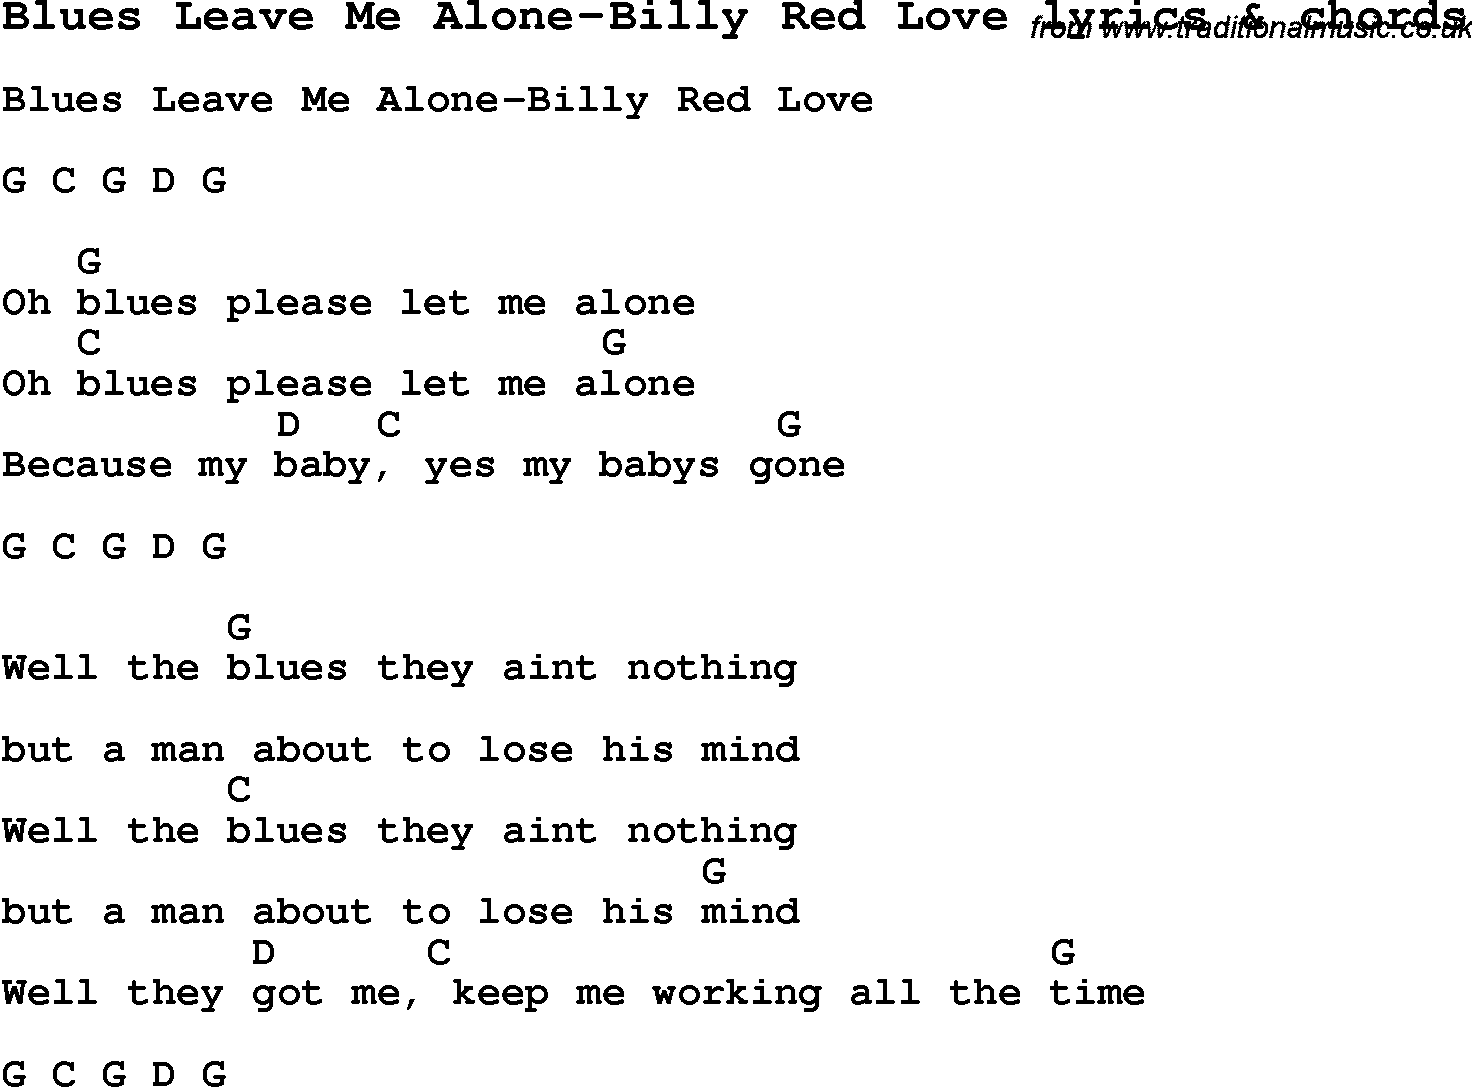 Love Song Lyrics for: Blues Leave Me Alone-Billy Red Love with chords for Ukulele, Guitar Banjo etc.